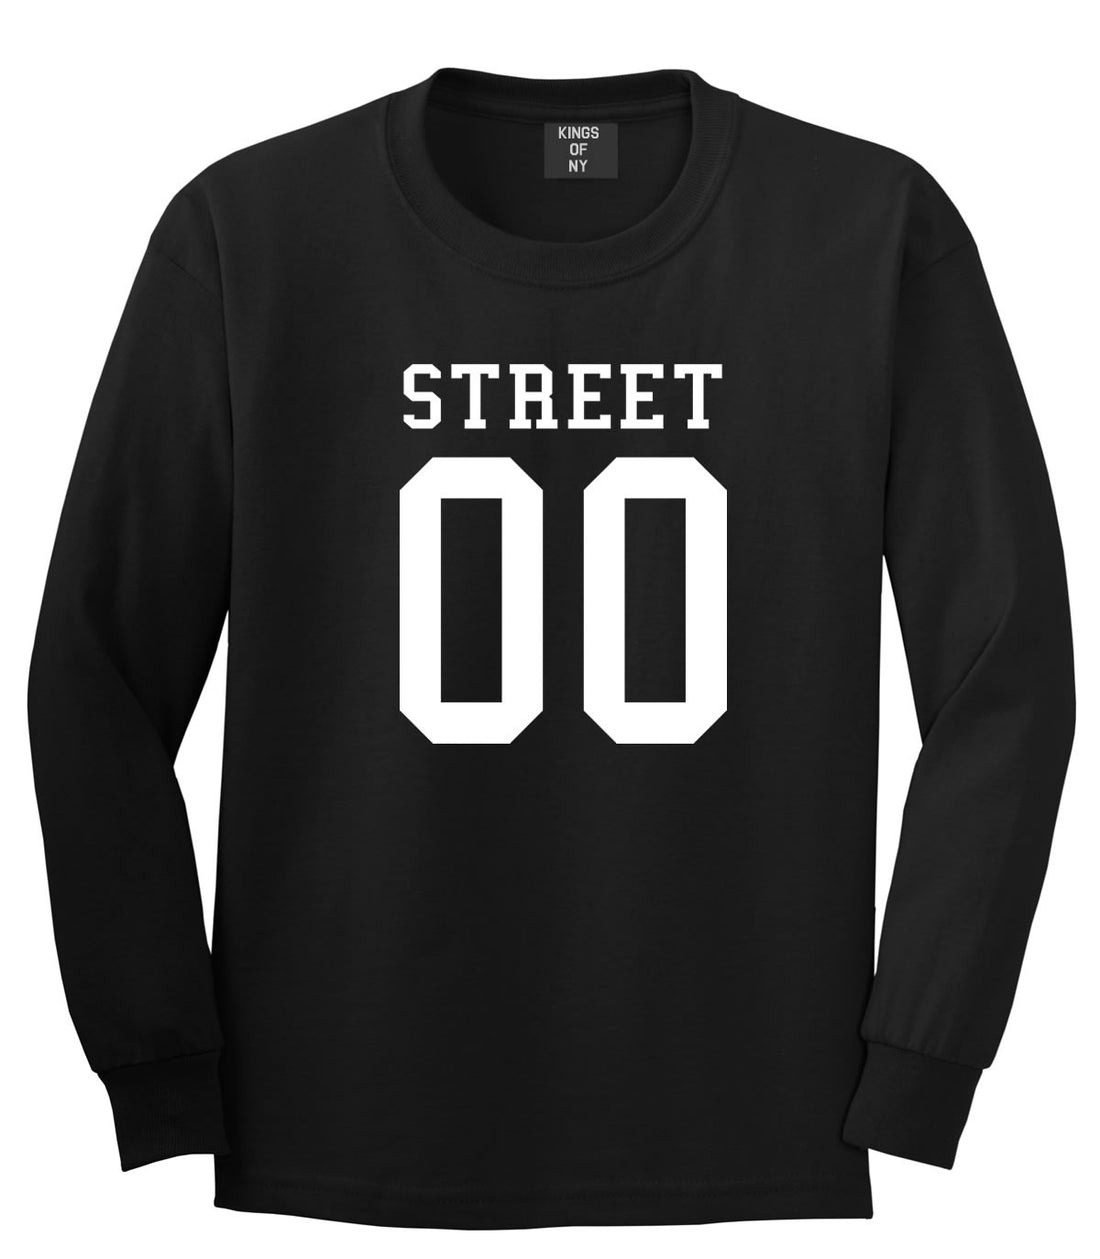 Street Team 00 Jersey Long Sleeve T-Shirt in Black By Kings Of NY